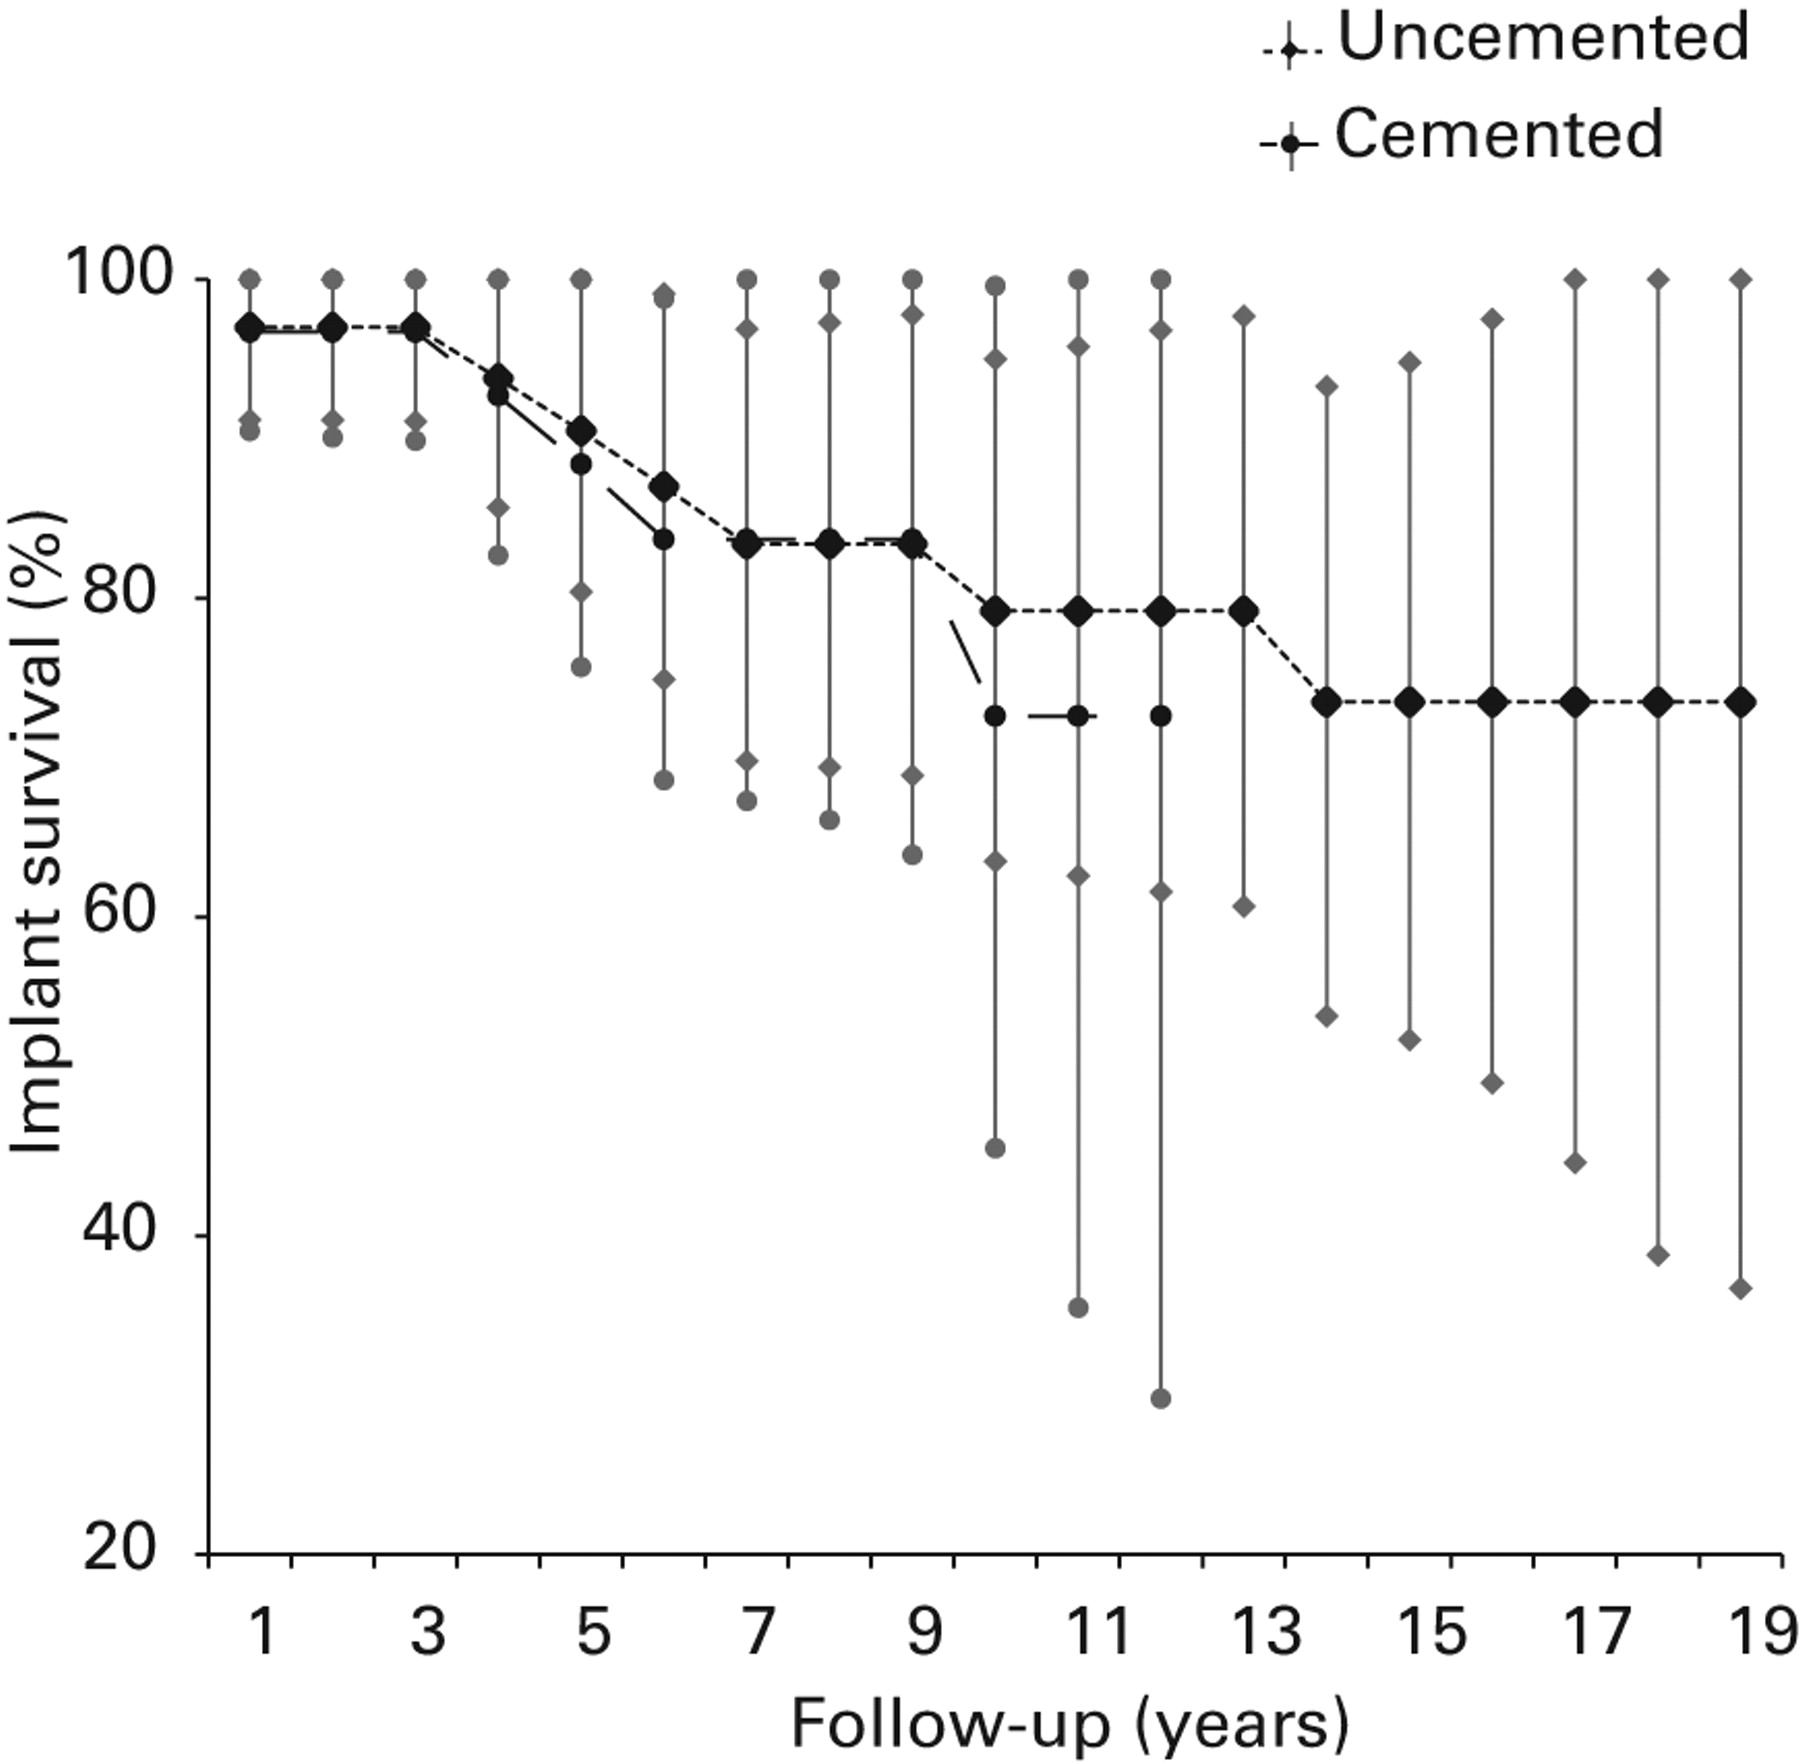 Fig. 2 
            Implant survival rates for both uncemented
and cemented groups. Error bars denote 95% confidence intervals.
          